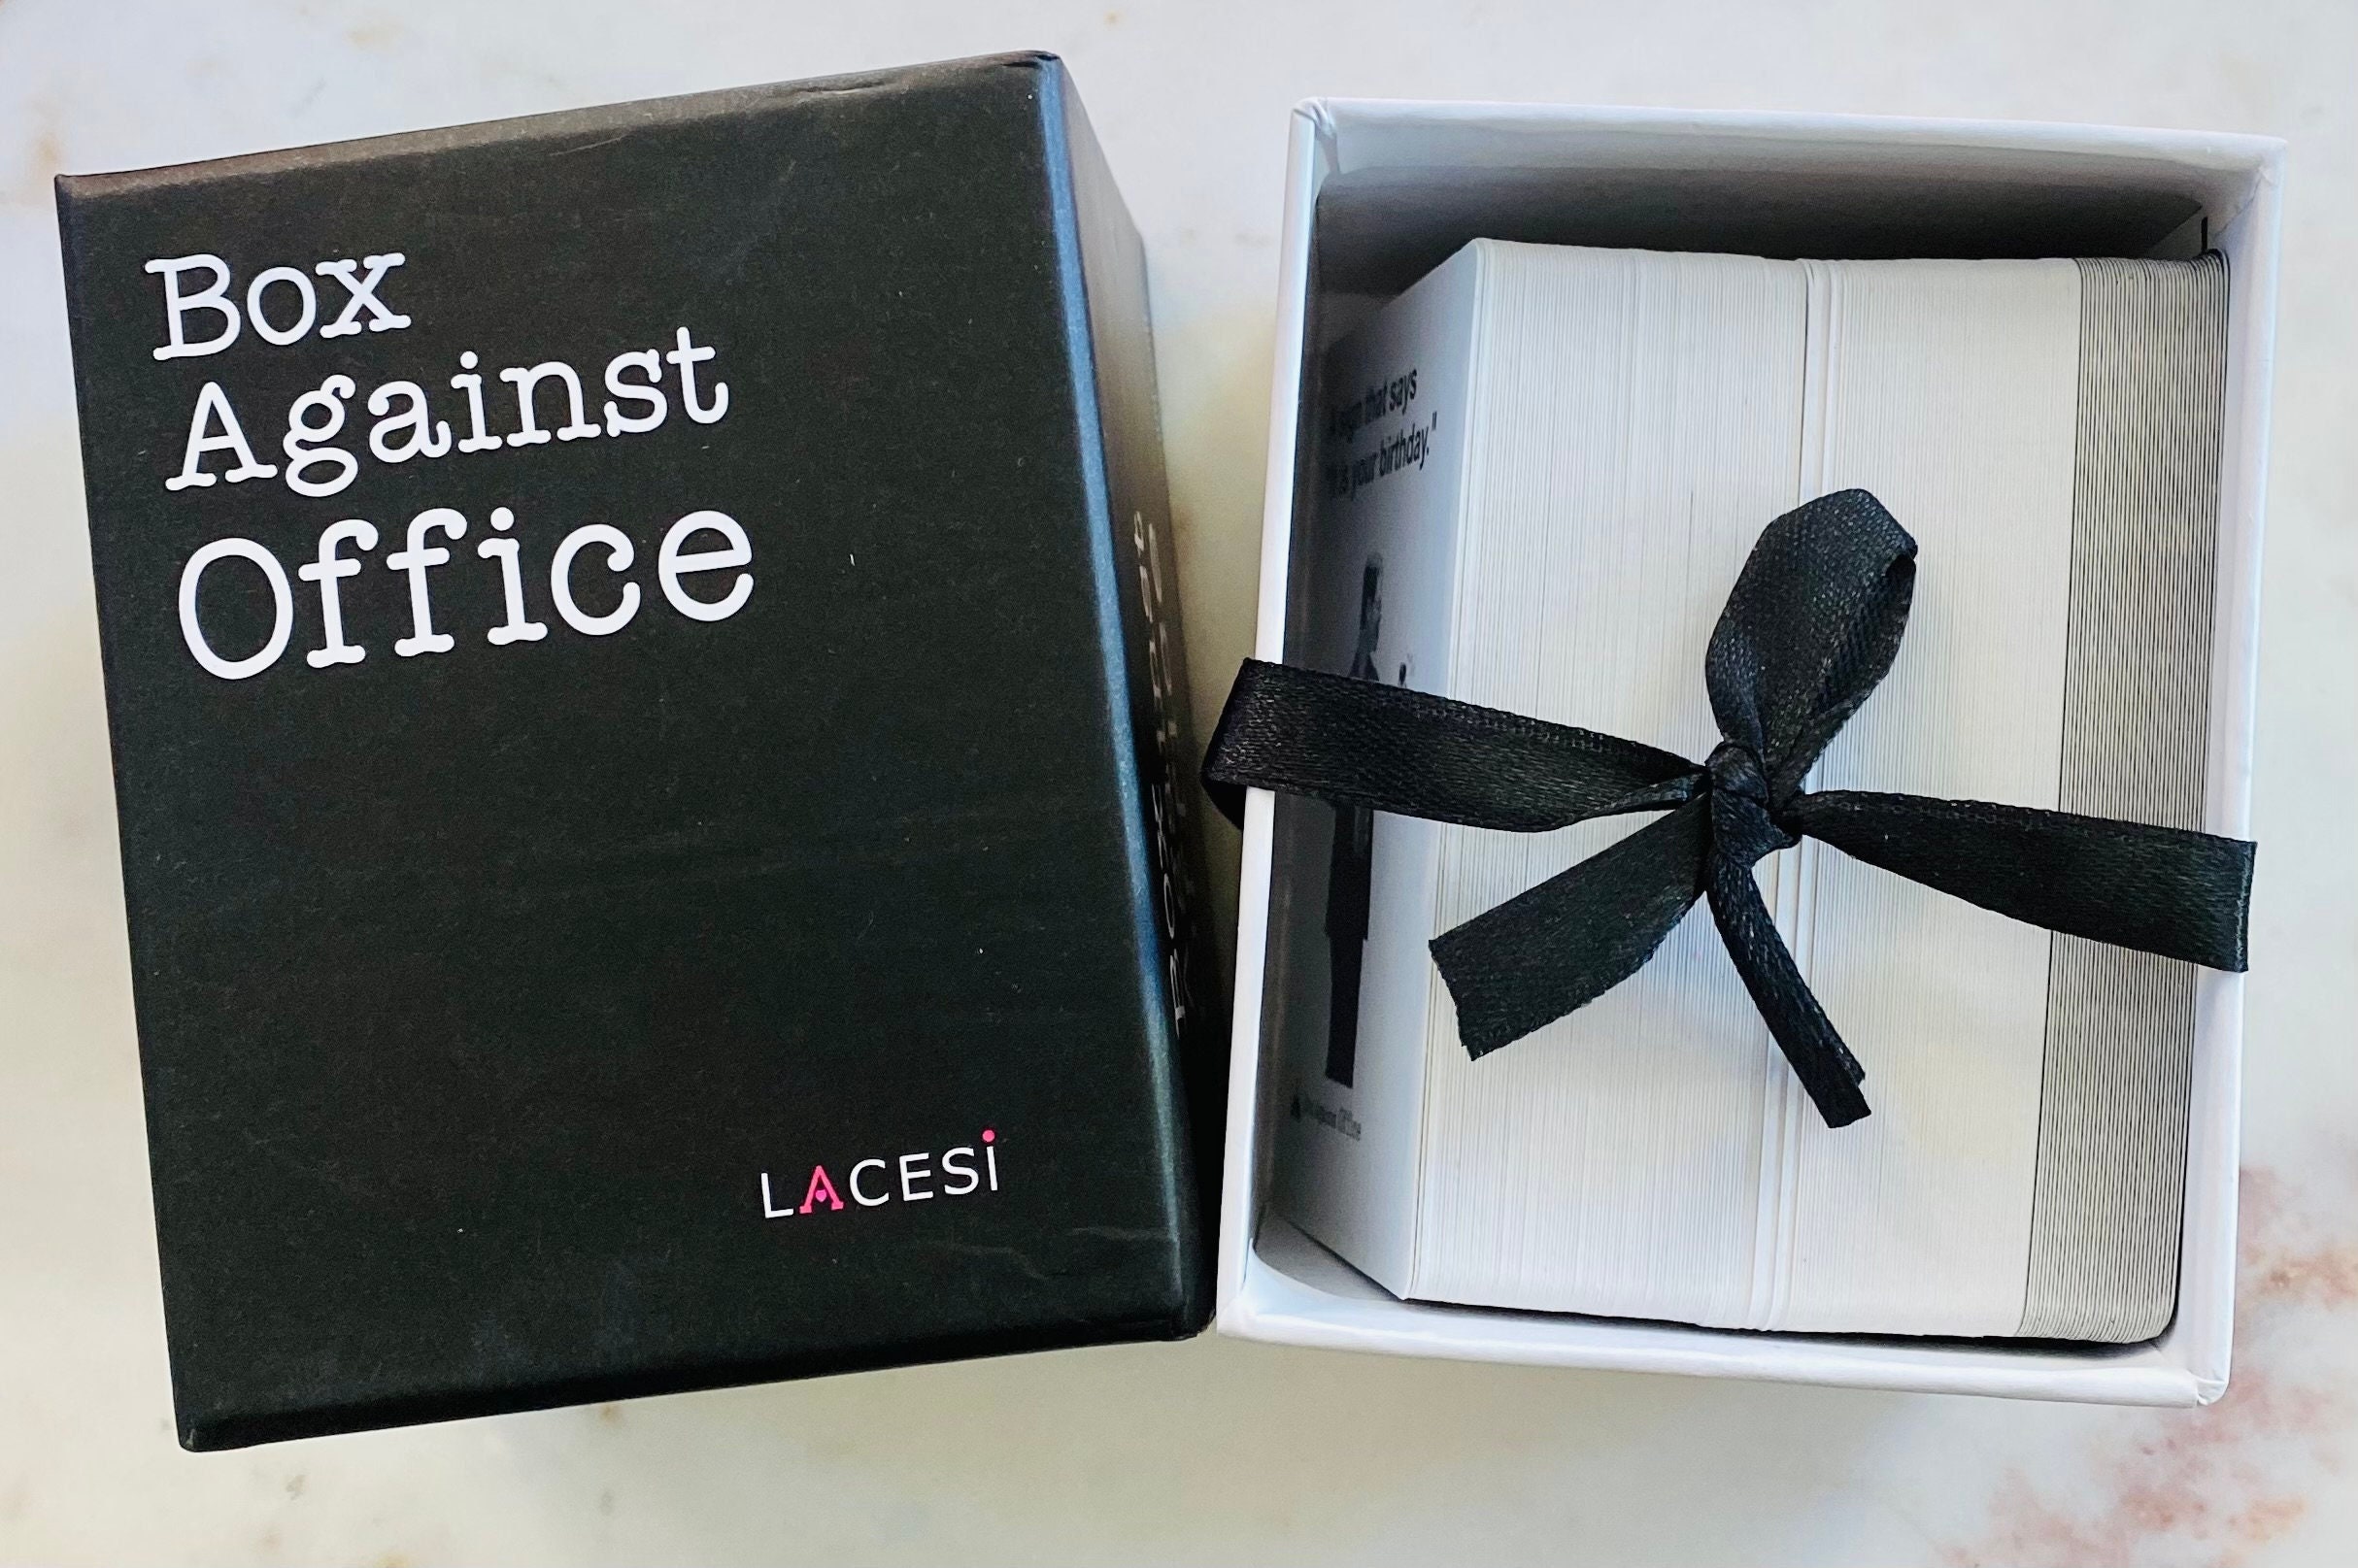 Unique Gifts for The Office Fans